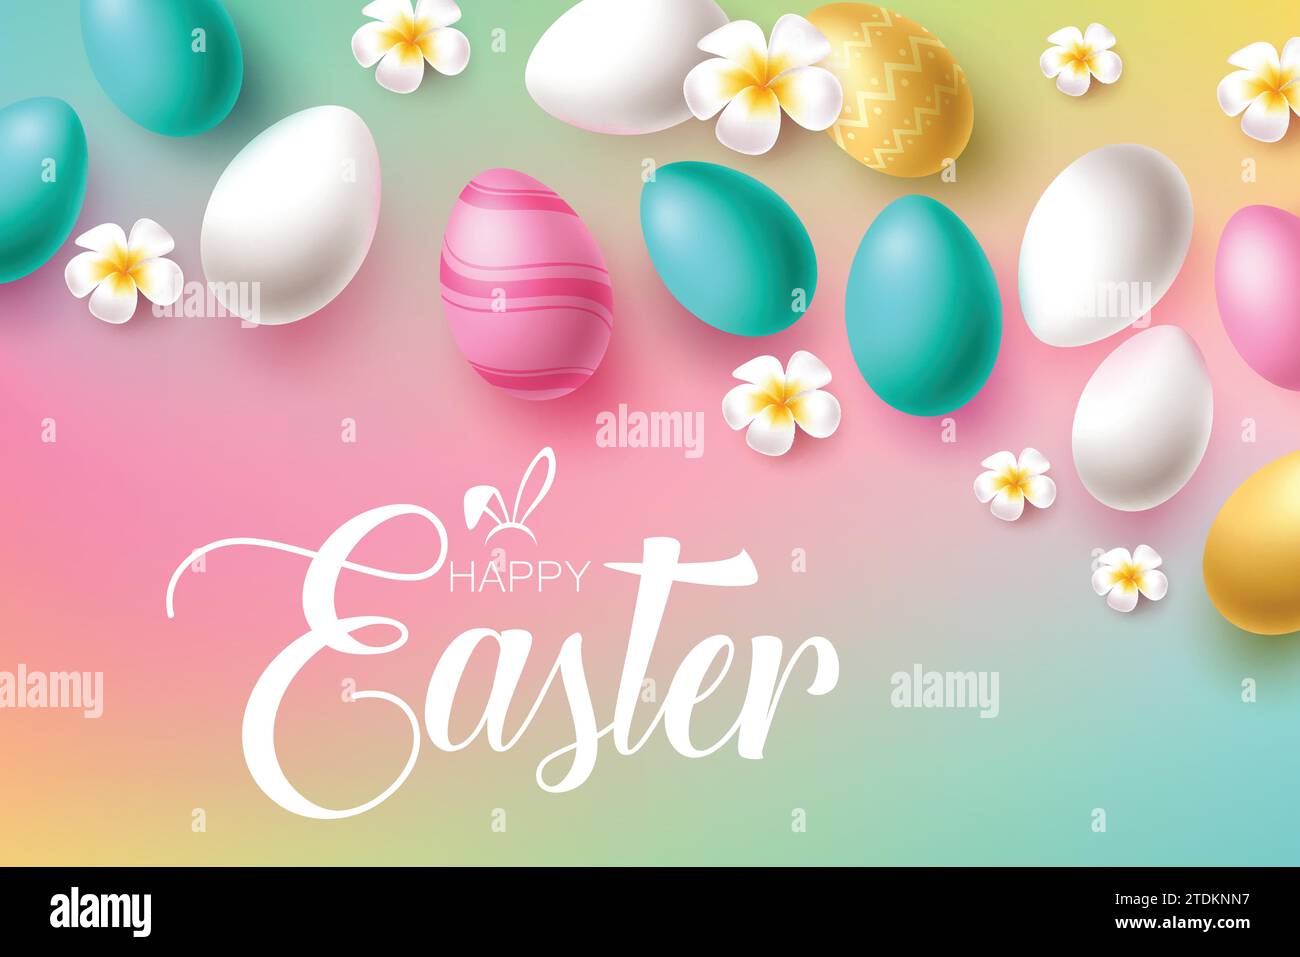 Happy easter text greeting vector design. Easter eggs hunt greeting card with color pastel egg elements decoration for holiday season background. Stock Vector